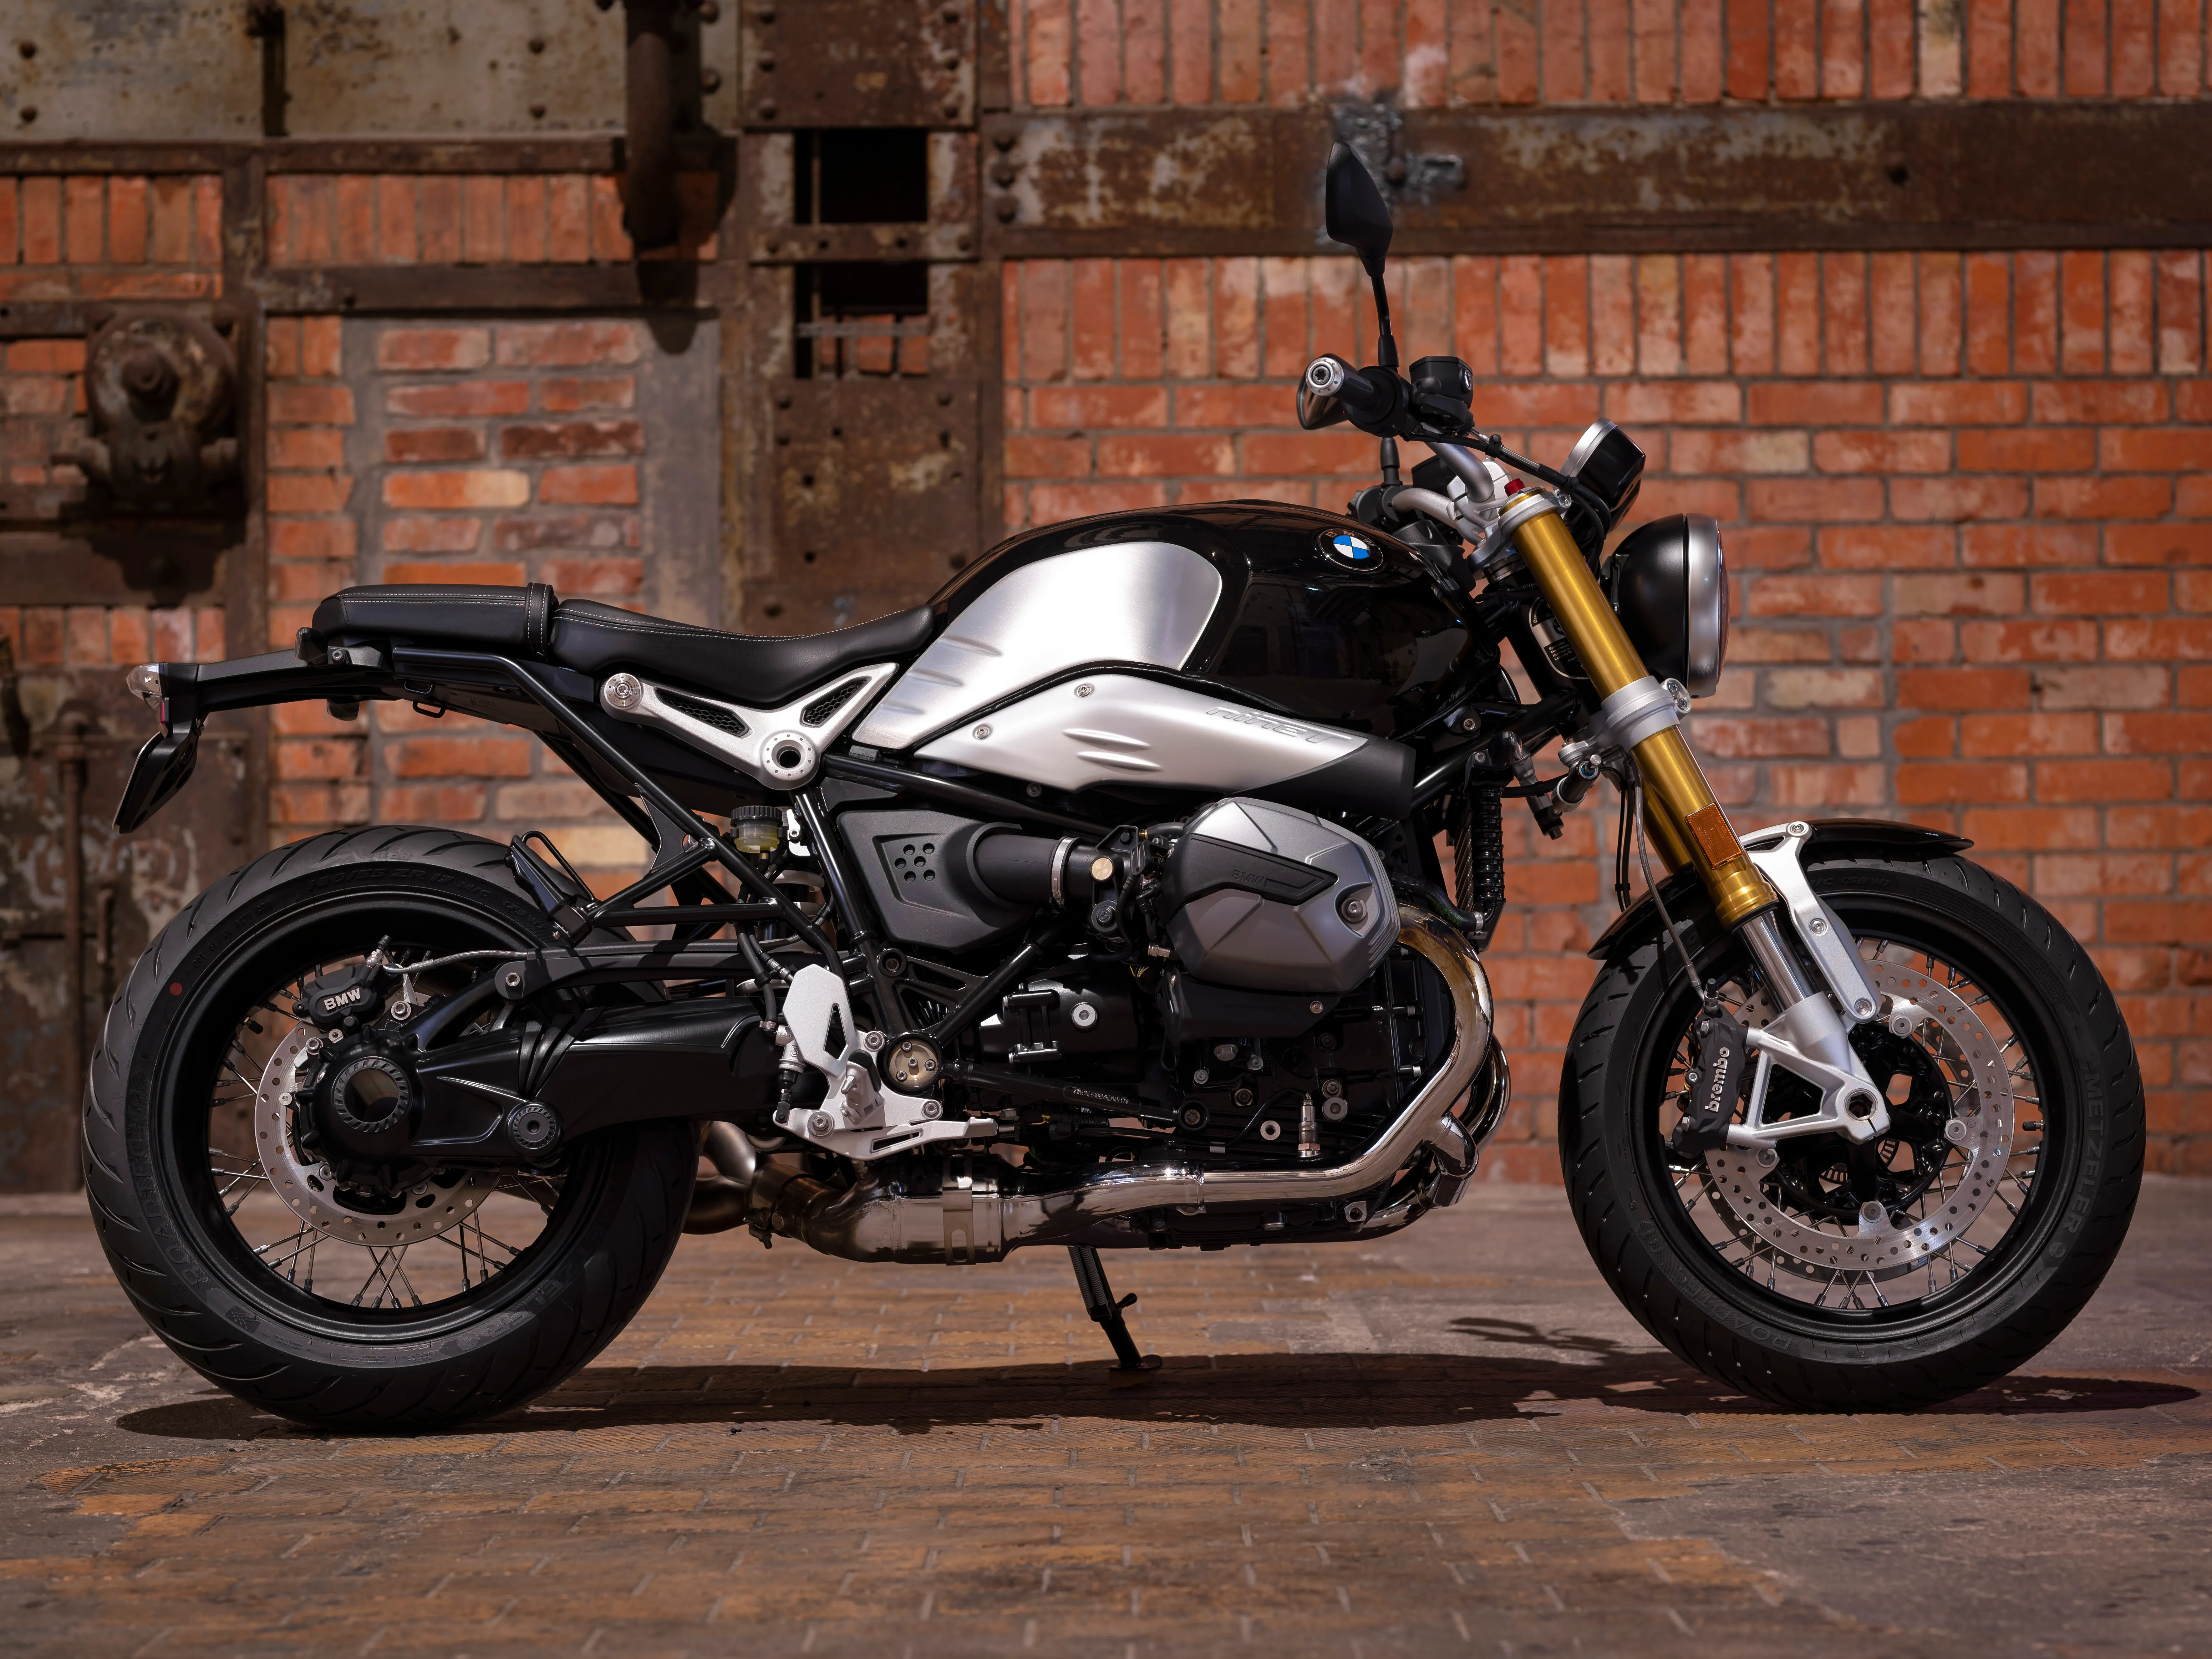 BMW's latest motorcycle releases showcase the brand's commitment to innovation and style